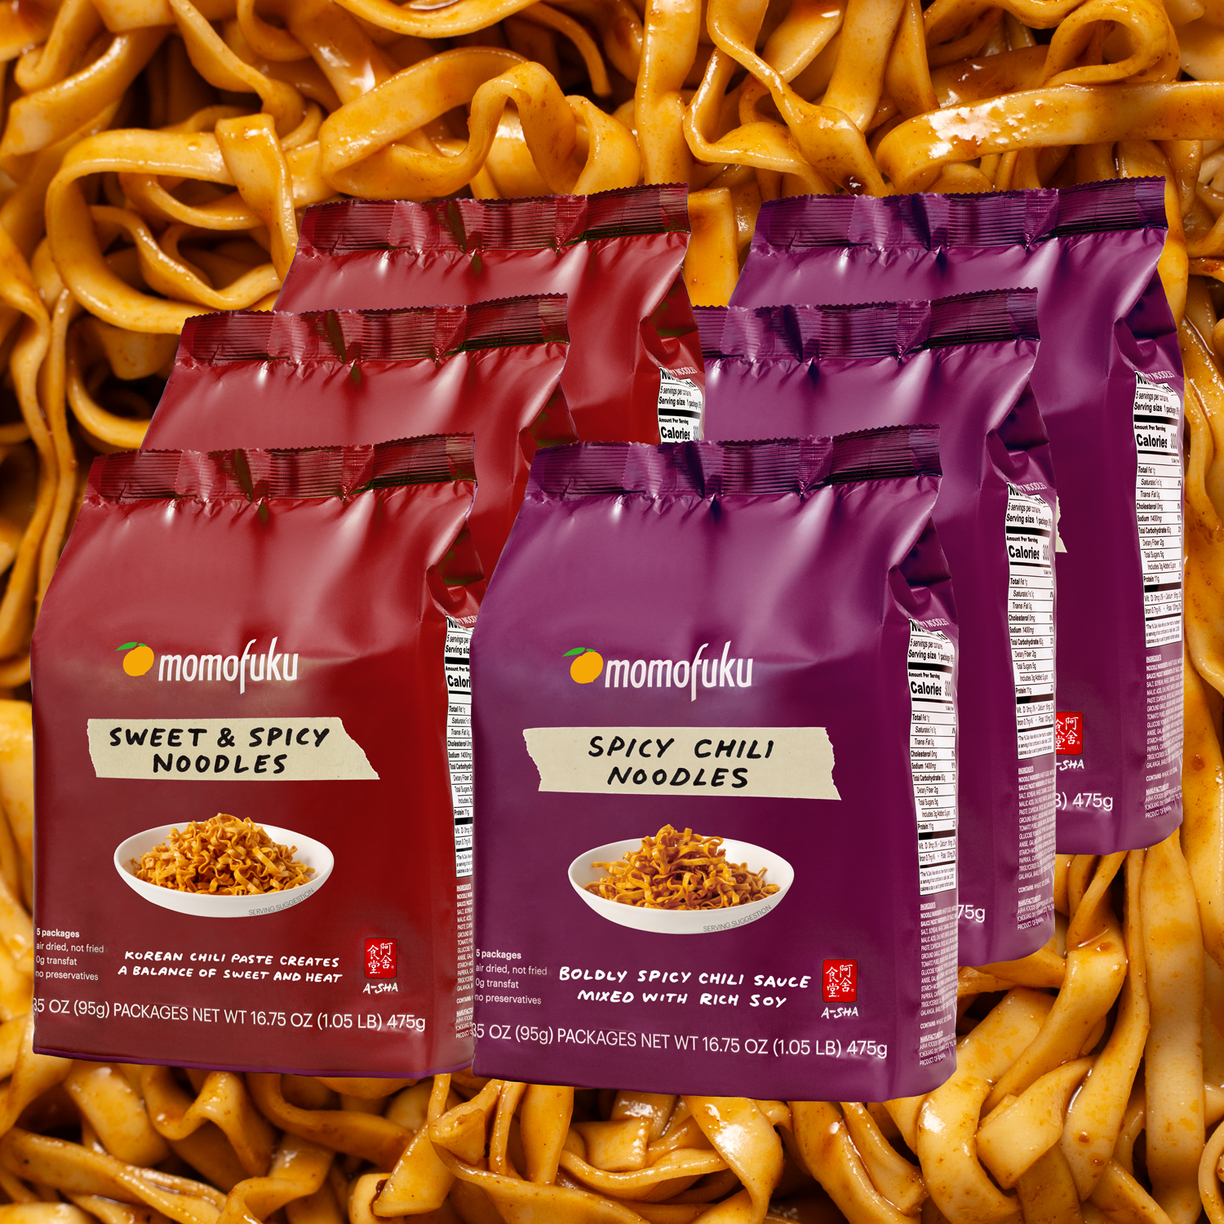 3 bags of sweet & spicy noodles, 3 bags of spicy chili noodles